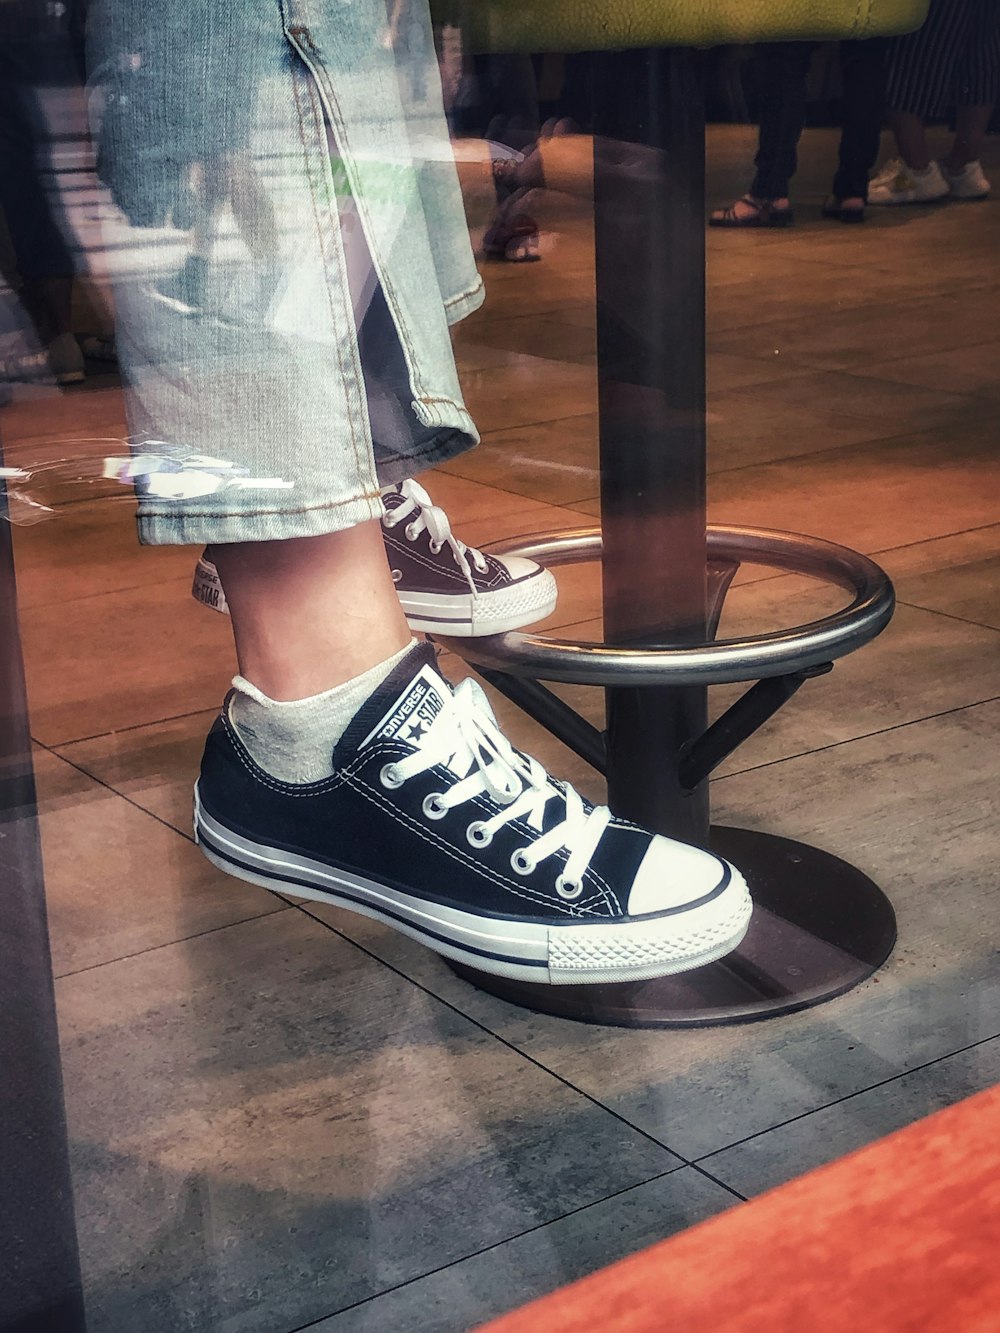 Pair of black-and-white Converse All-Star low-top shoes photo – Free  Schweizergasse 10 Image on Unsplash